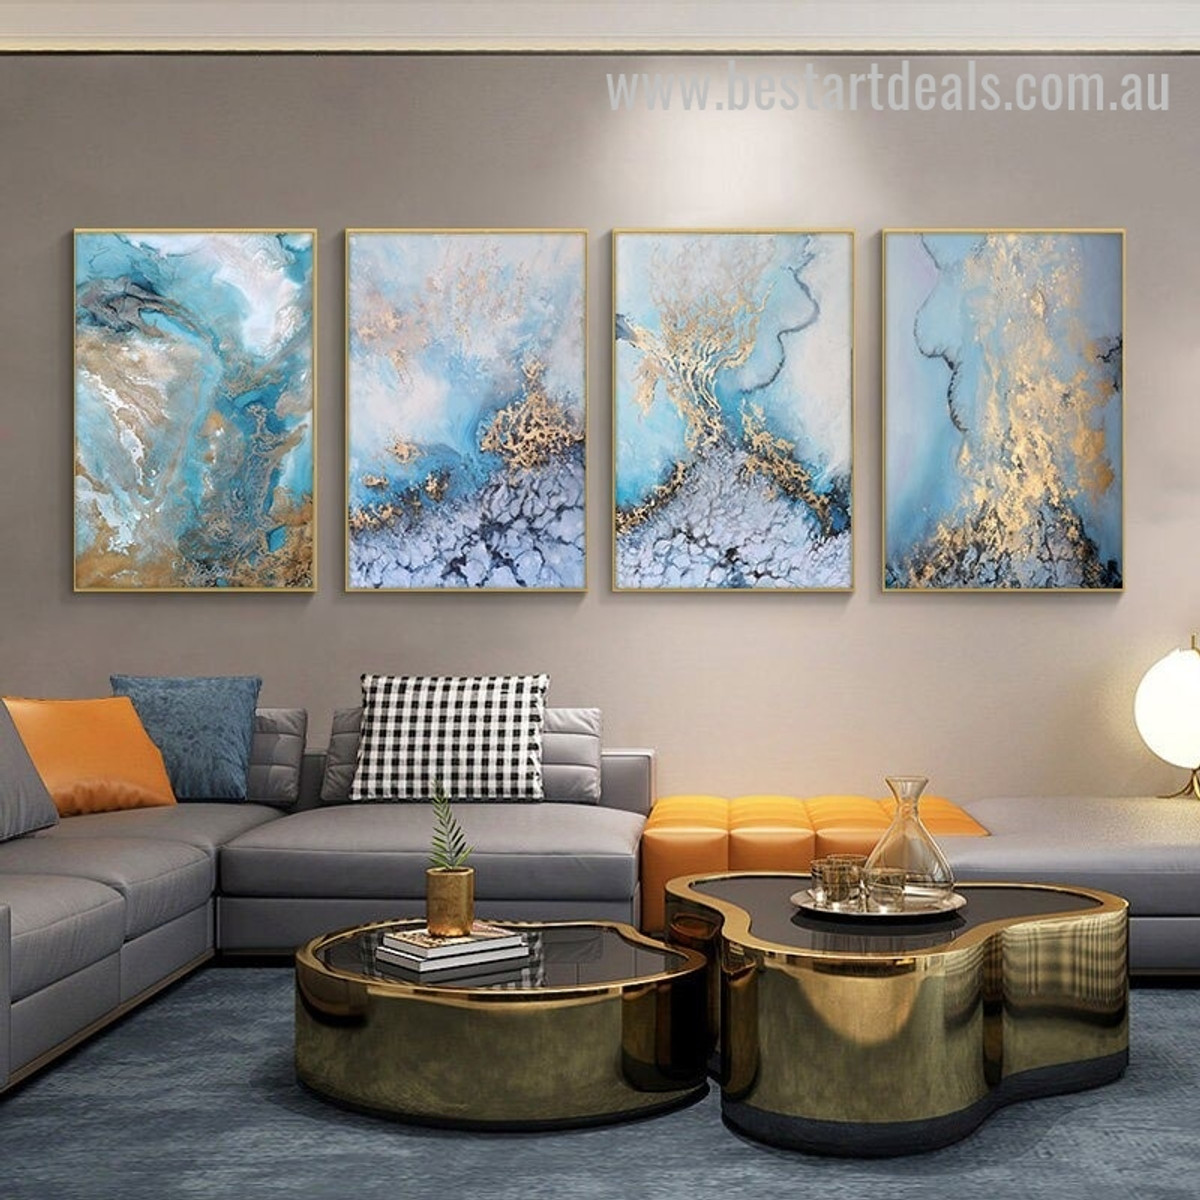 Water Effervescence Abstract Seascape Modern Artwork Pic Canvas Print for Room Wall Garnish